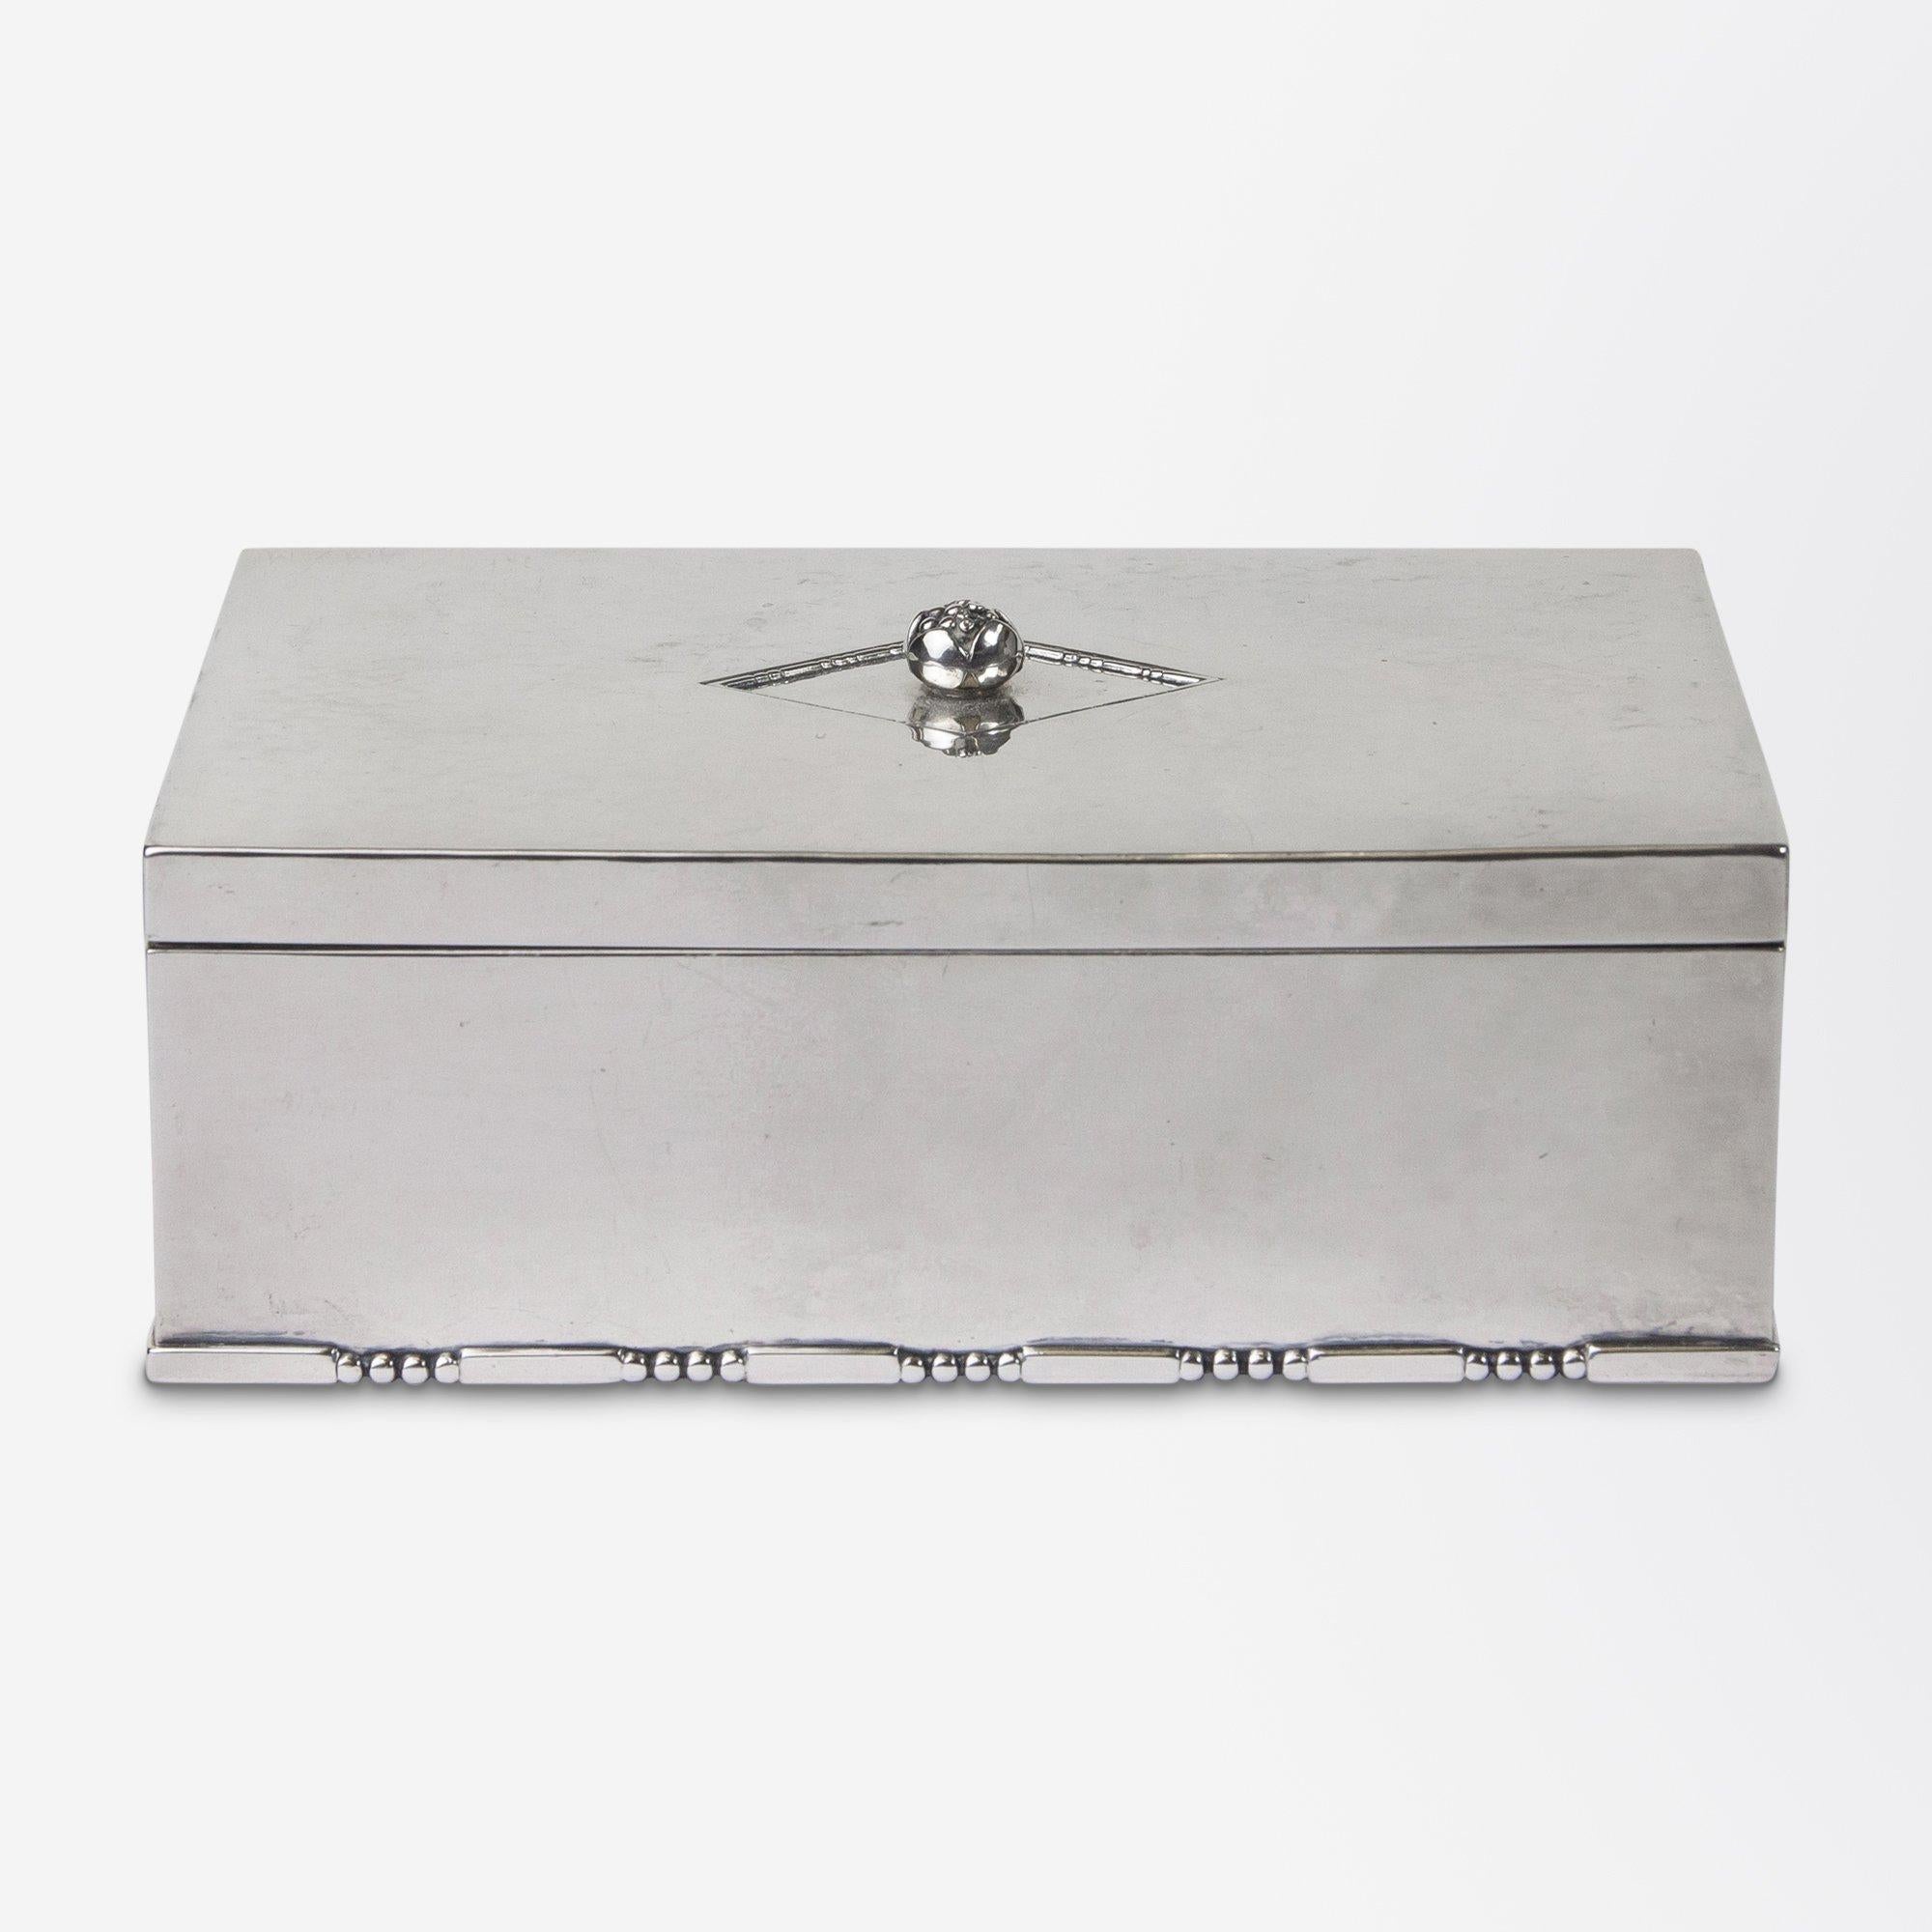 An exceptional Art Deco sterling silver cigarette or jewel box designed by Johan Rohde (1856-1935) for Georg Jensen. The silver box had a berry finial positioned to the centre of an incised lozenge and the bottom rim of the box has a part beaded